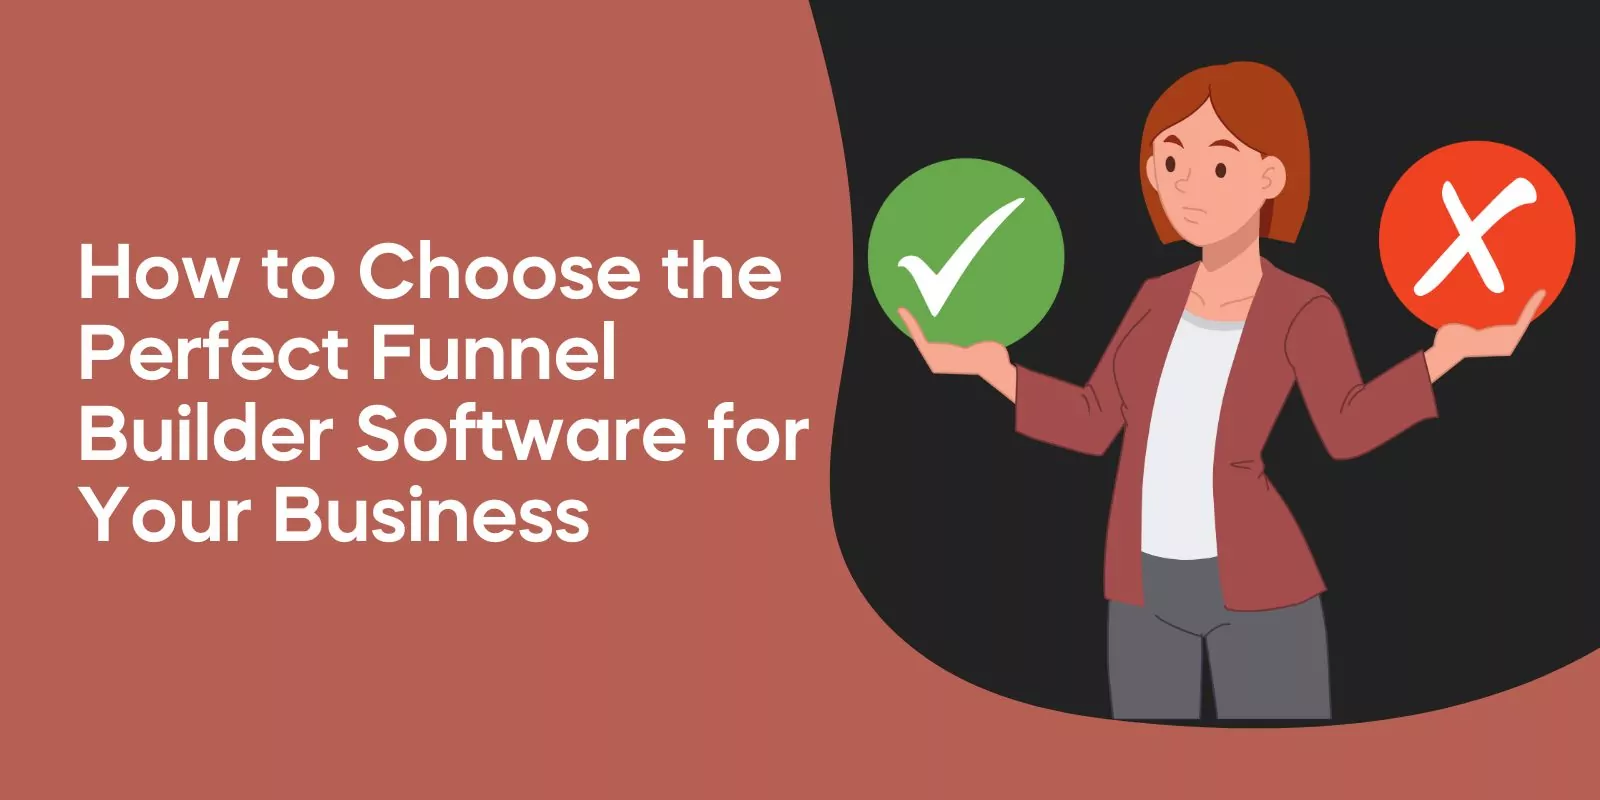 How to Choose the Perfect Funnel Builder Software